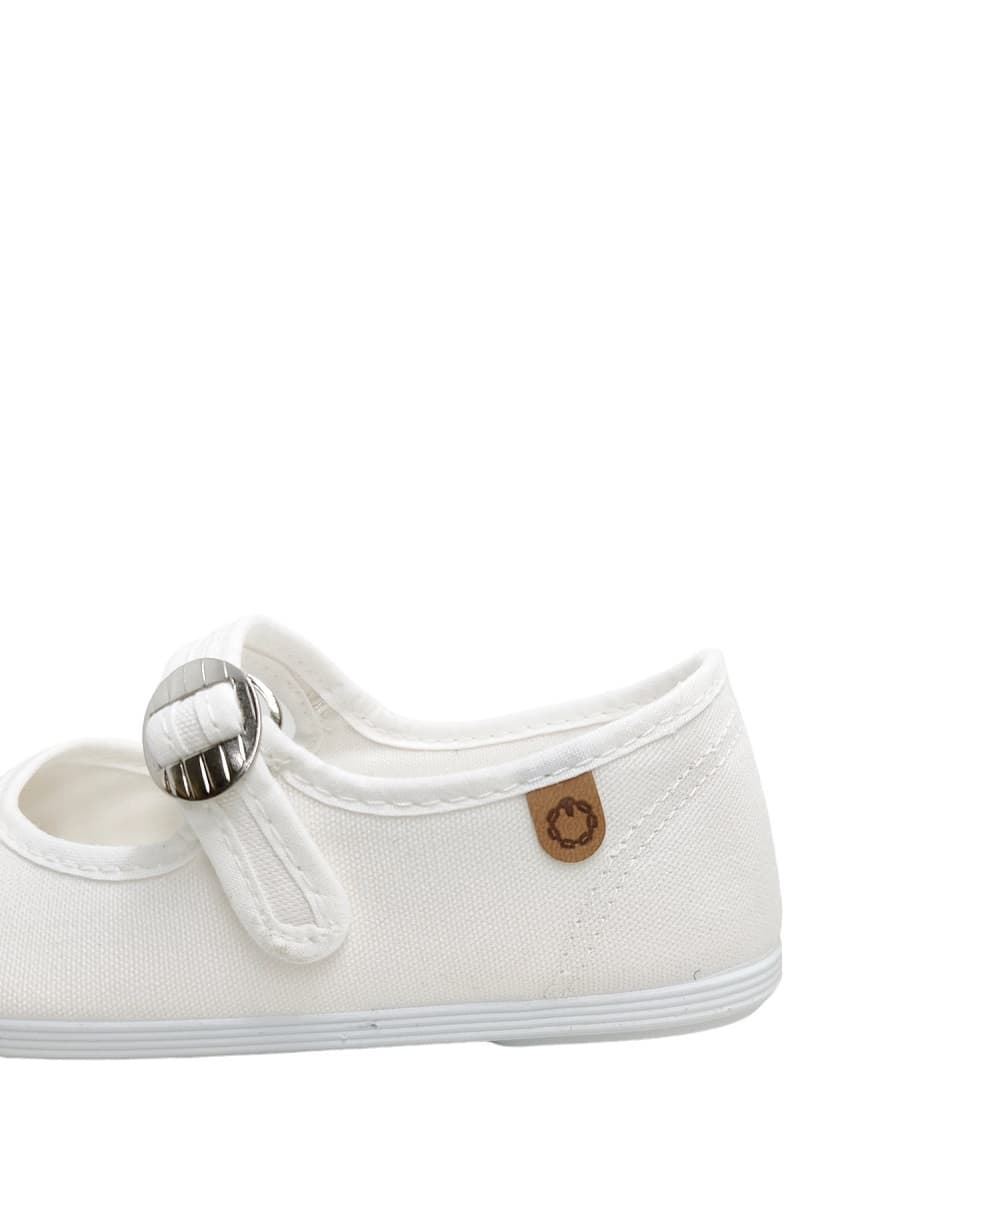 The Merceditas Chain for girls White Canvas - Image 2